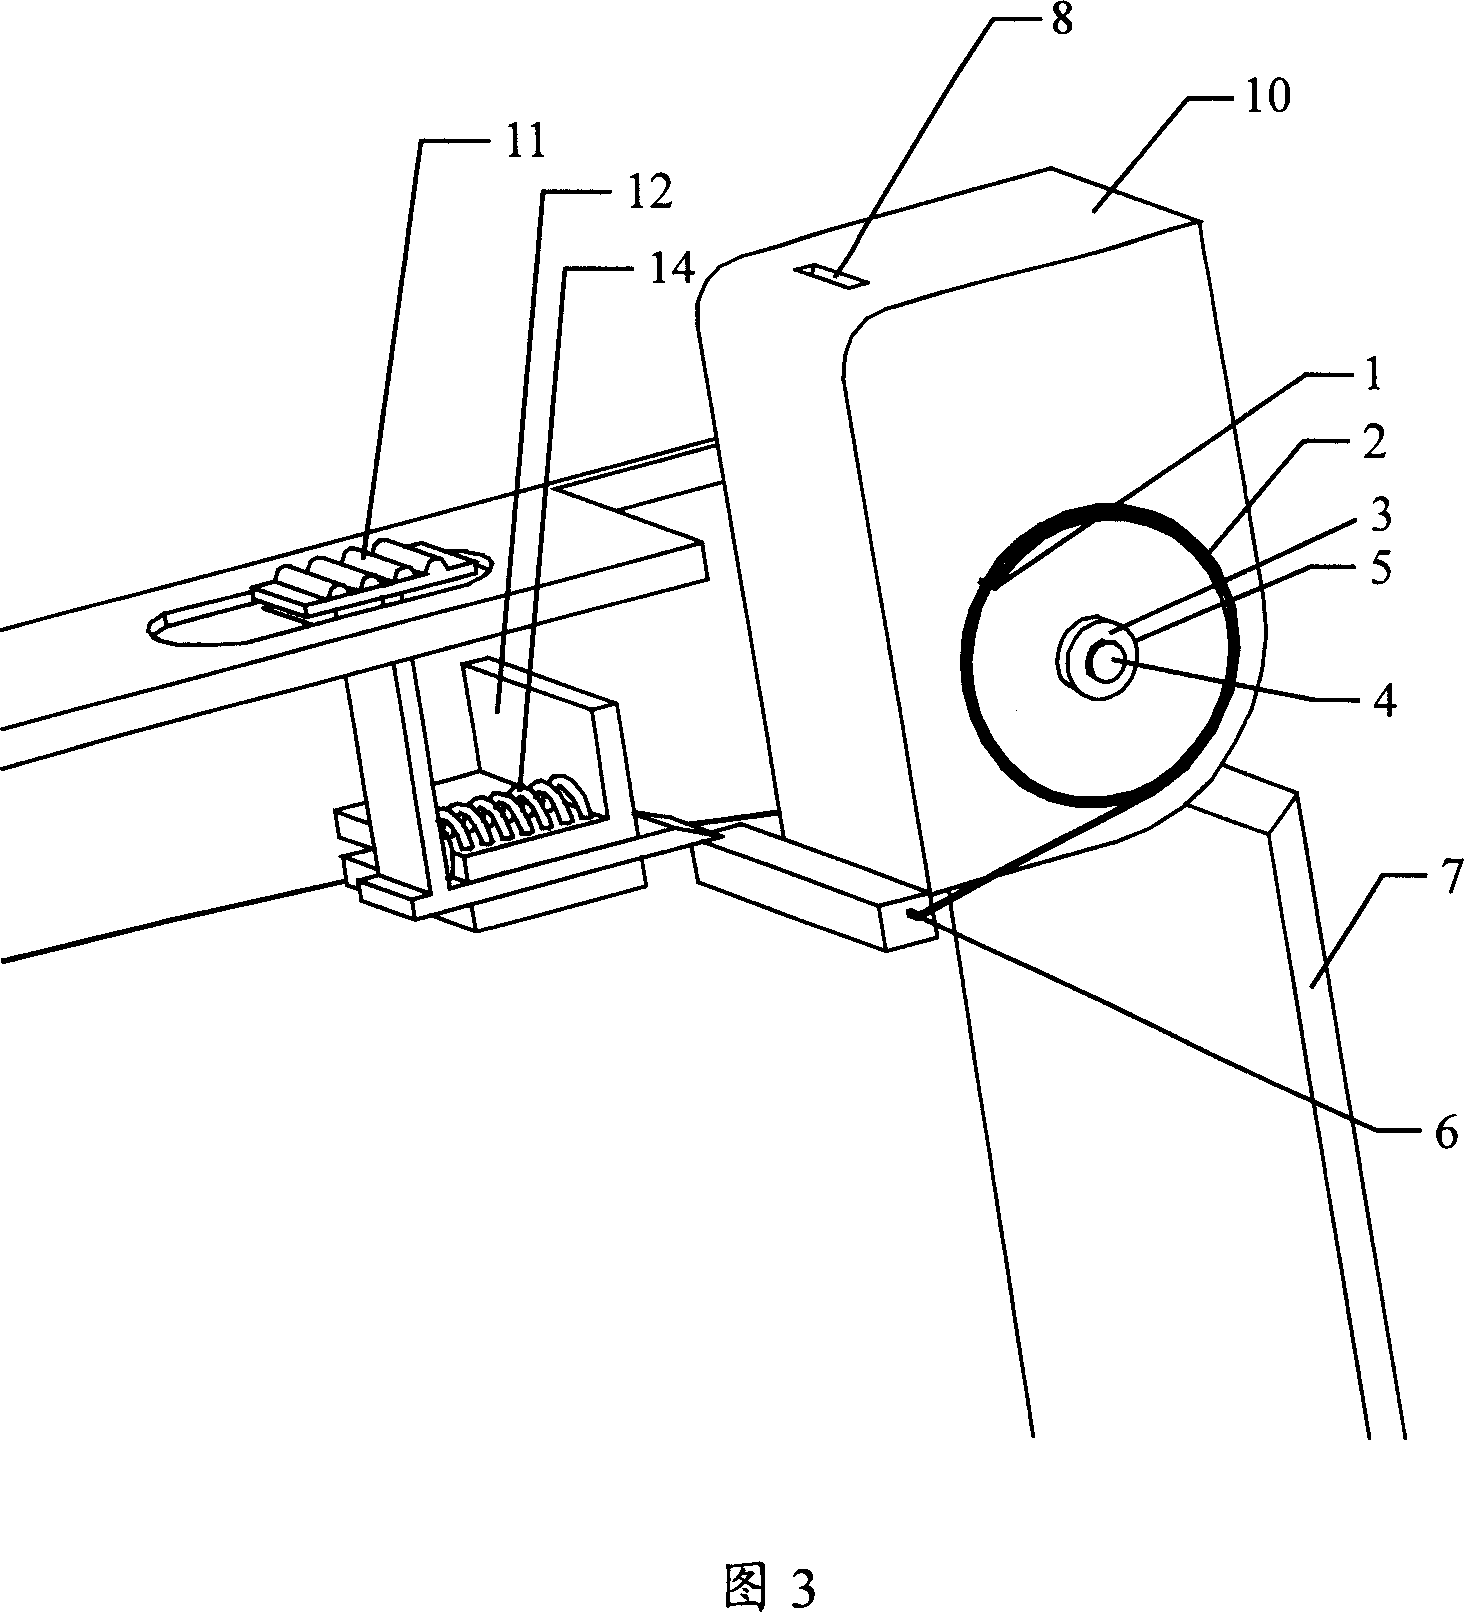 Side-wise rotary type automatic ejection pick-up head